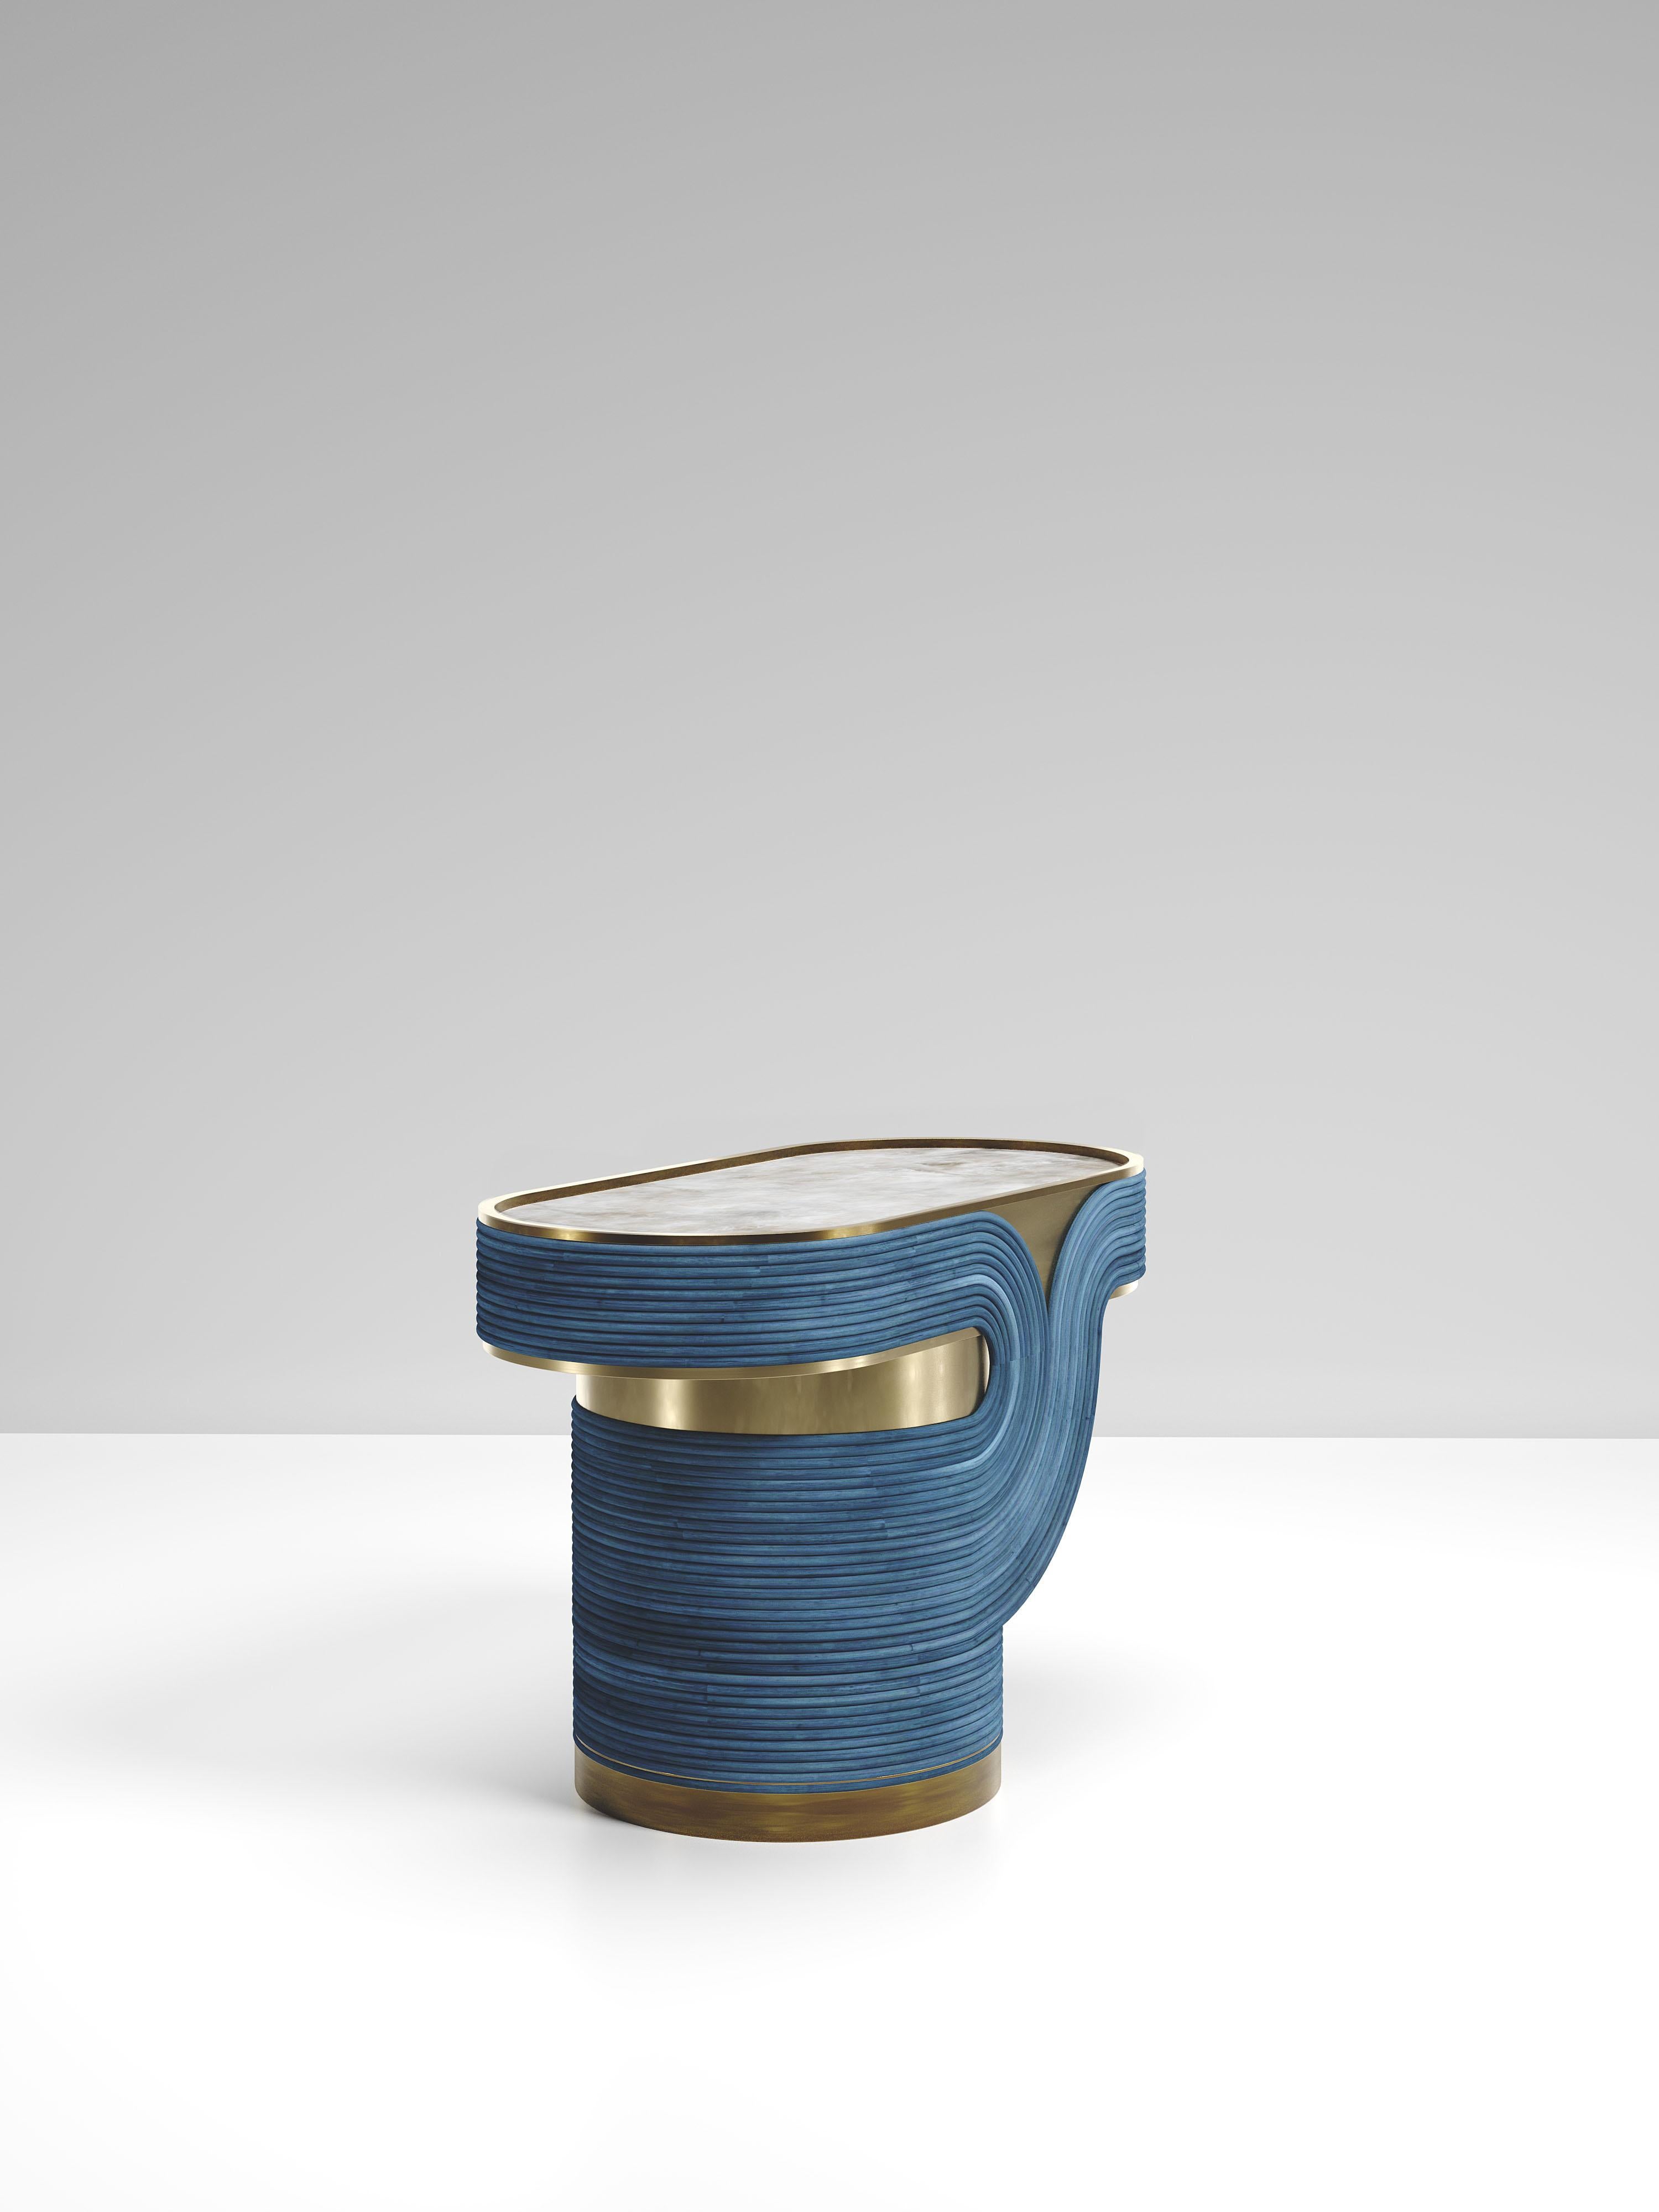 The Licol Side table by R & Y Augousti is a part of their new Rattan capsule launch. The piece explores the brand's iconic DNA of bringing old world artisanal craft into a contemporary and utterly luxury feel. This table is done in a blue rattan